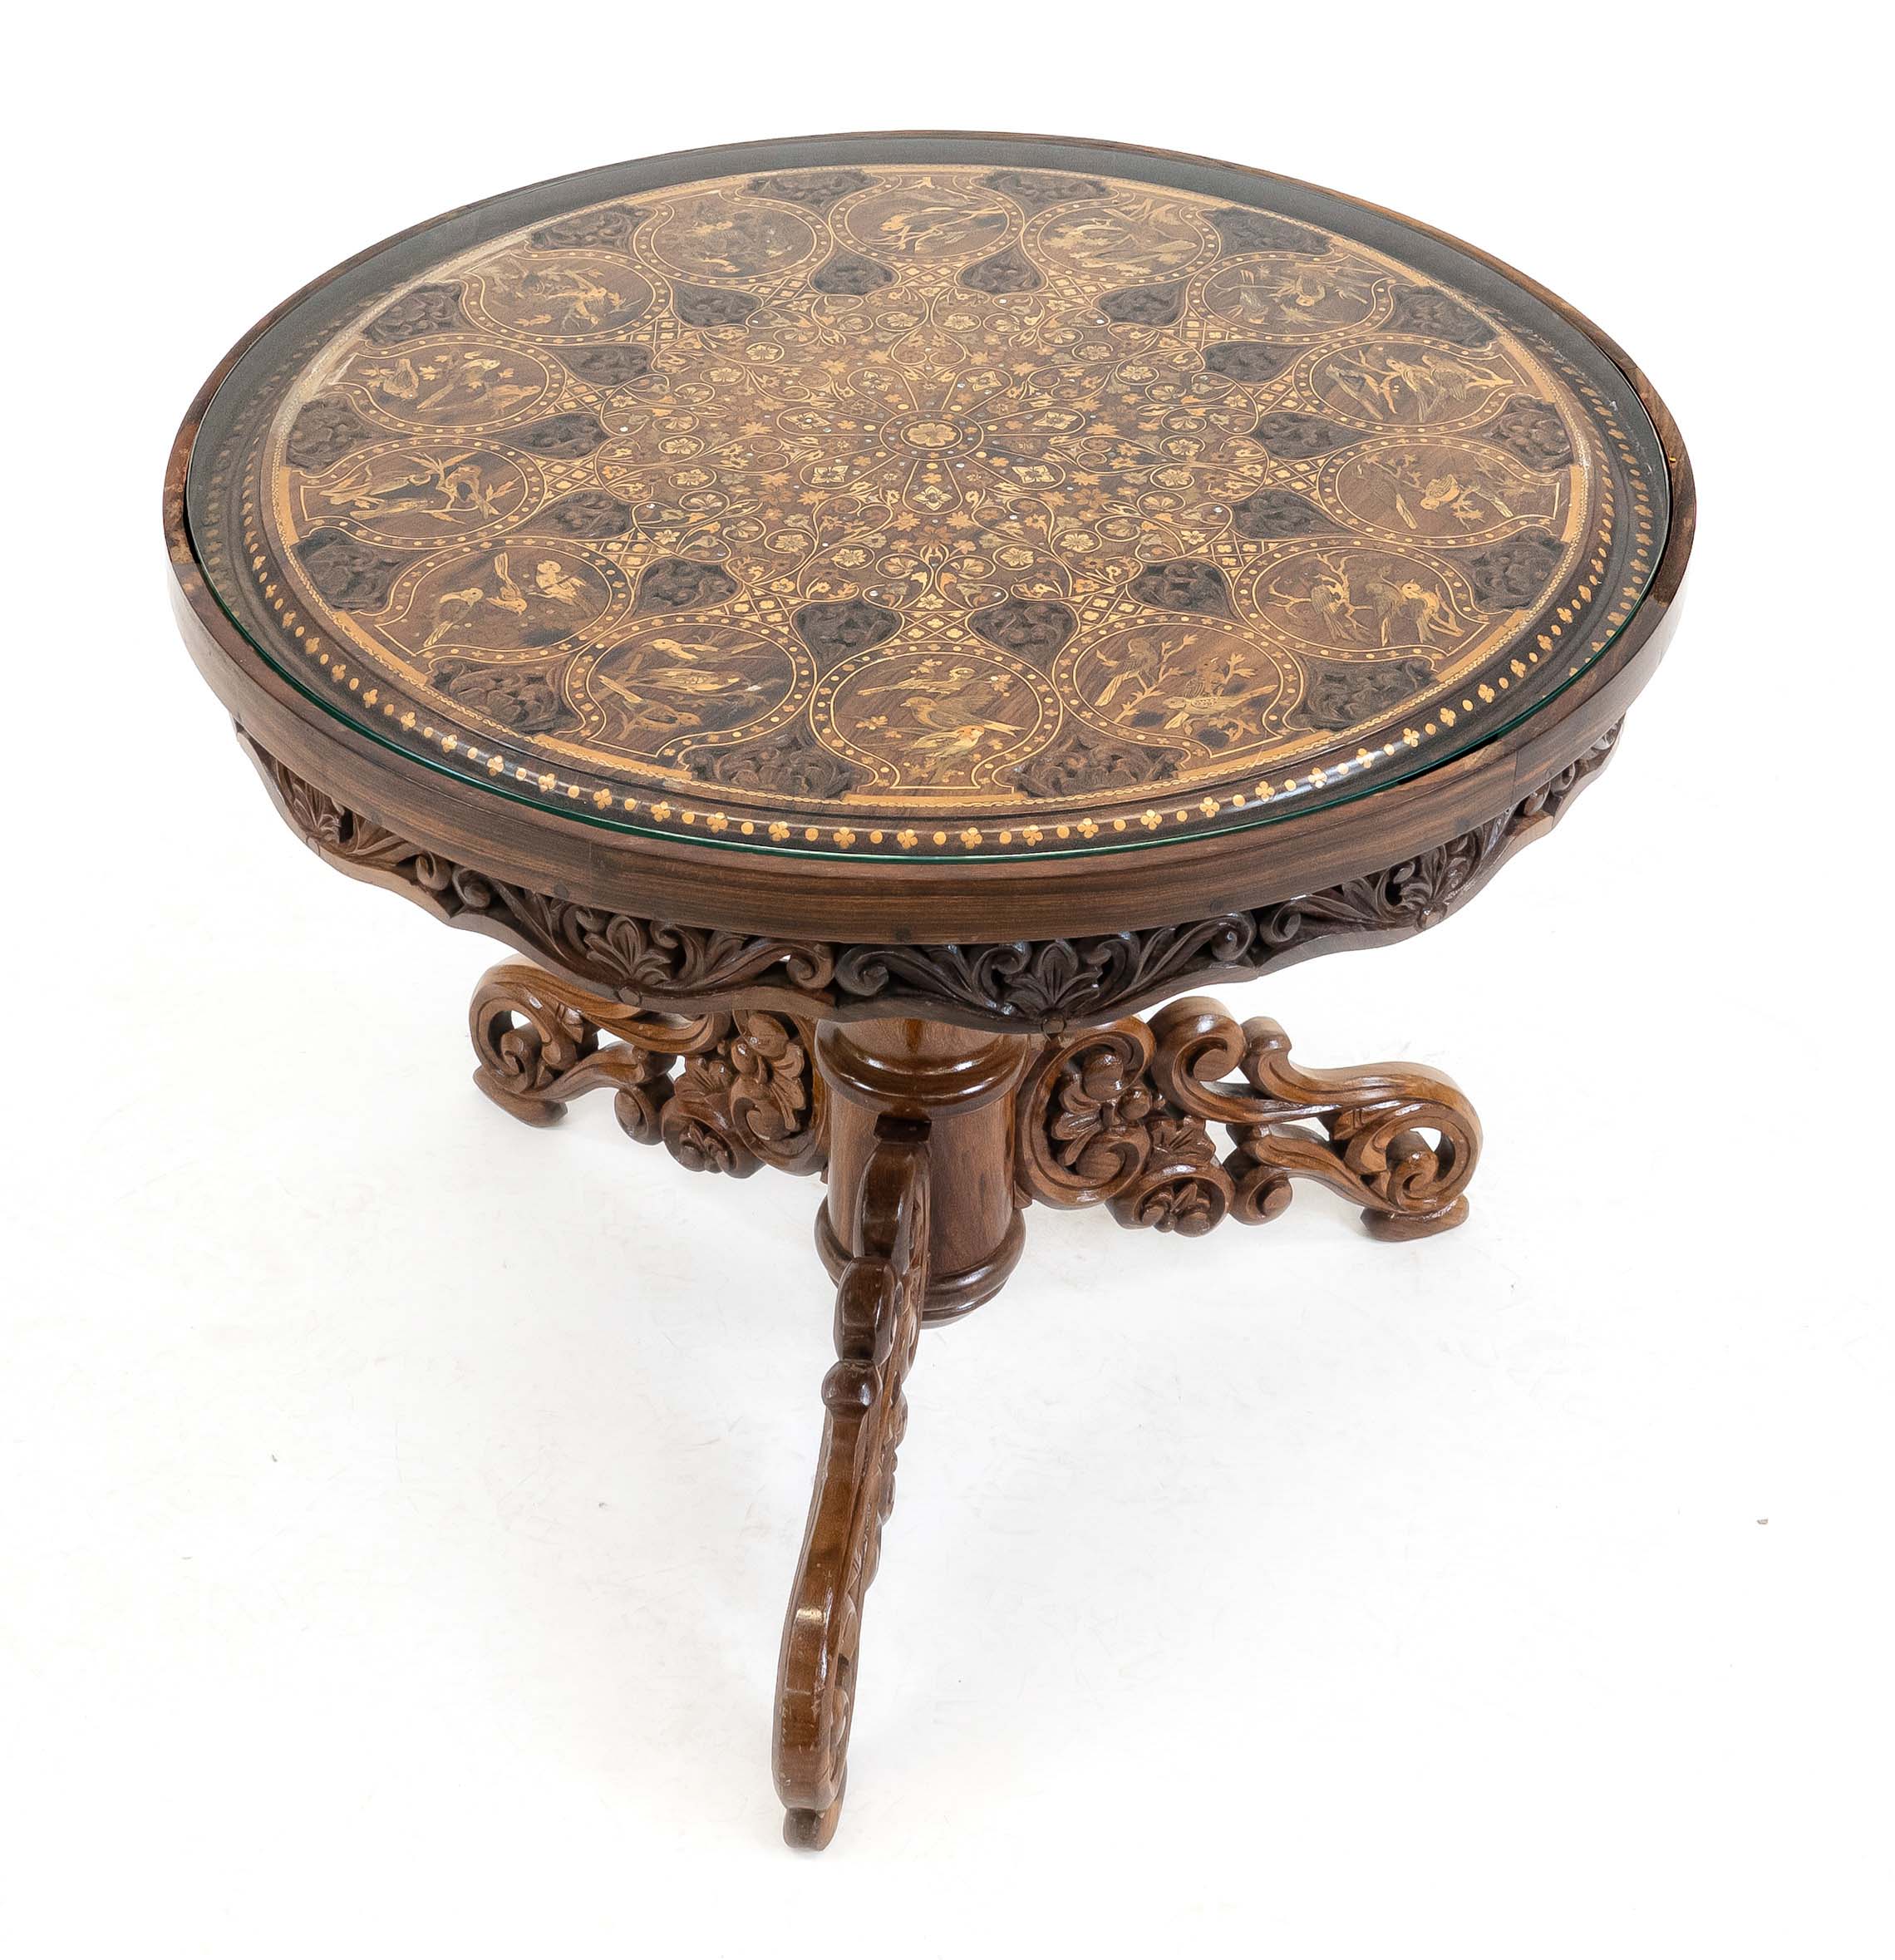 Oriental side table, 20th c., walnut-like solid wood with luxuriant carving, top with inlaid various